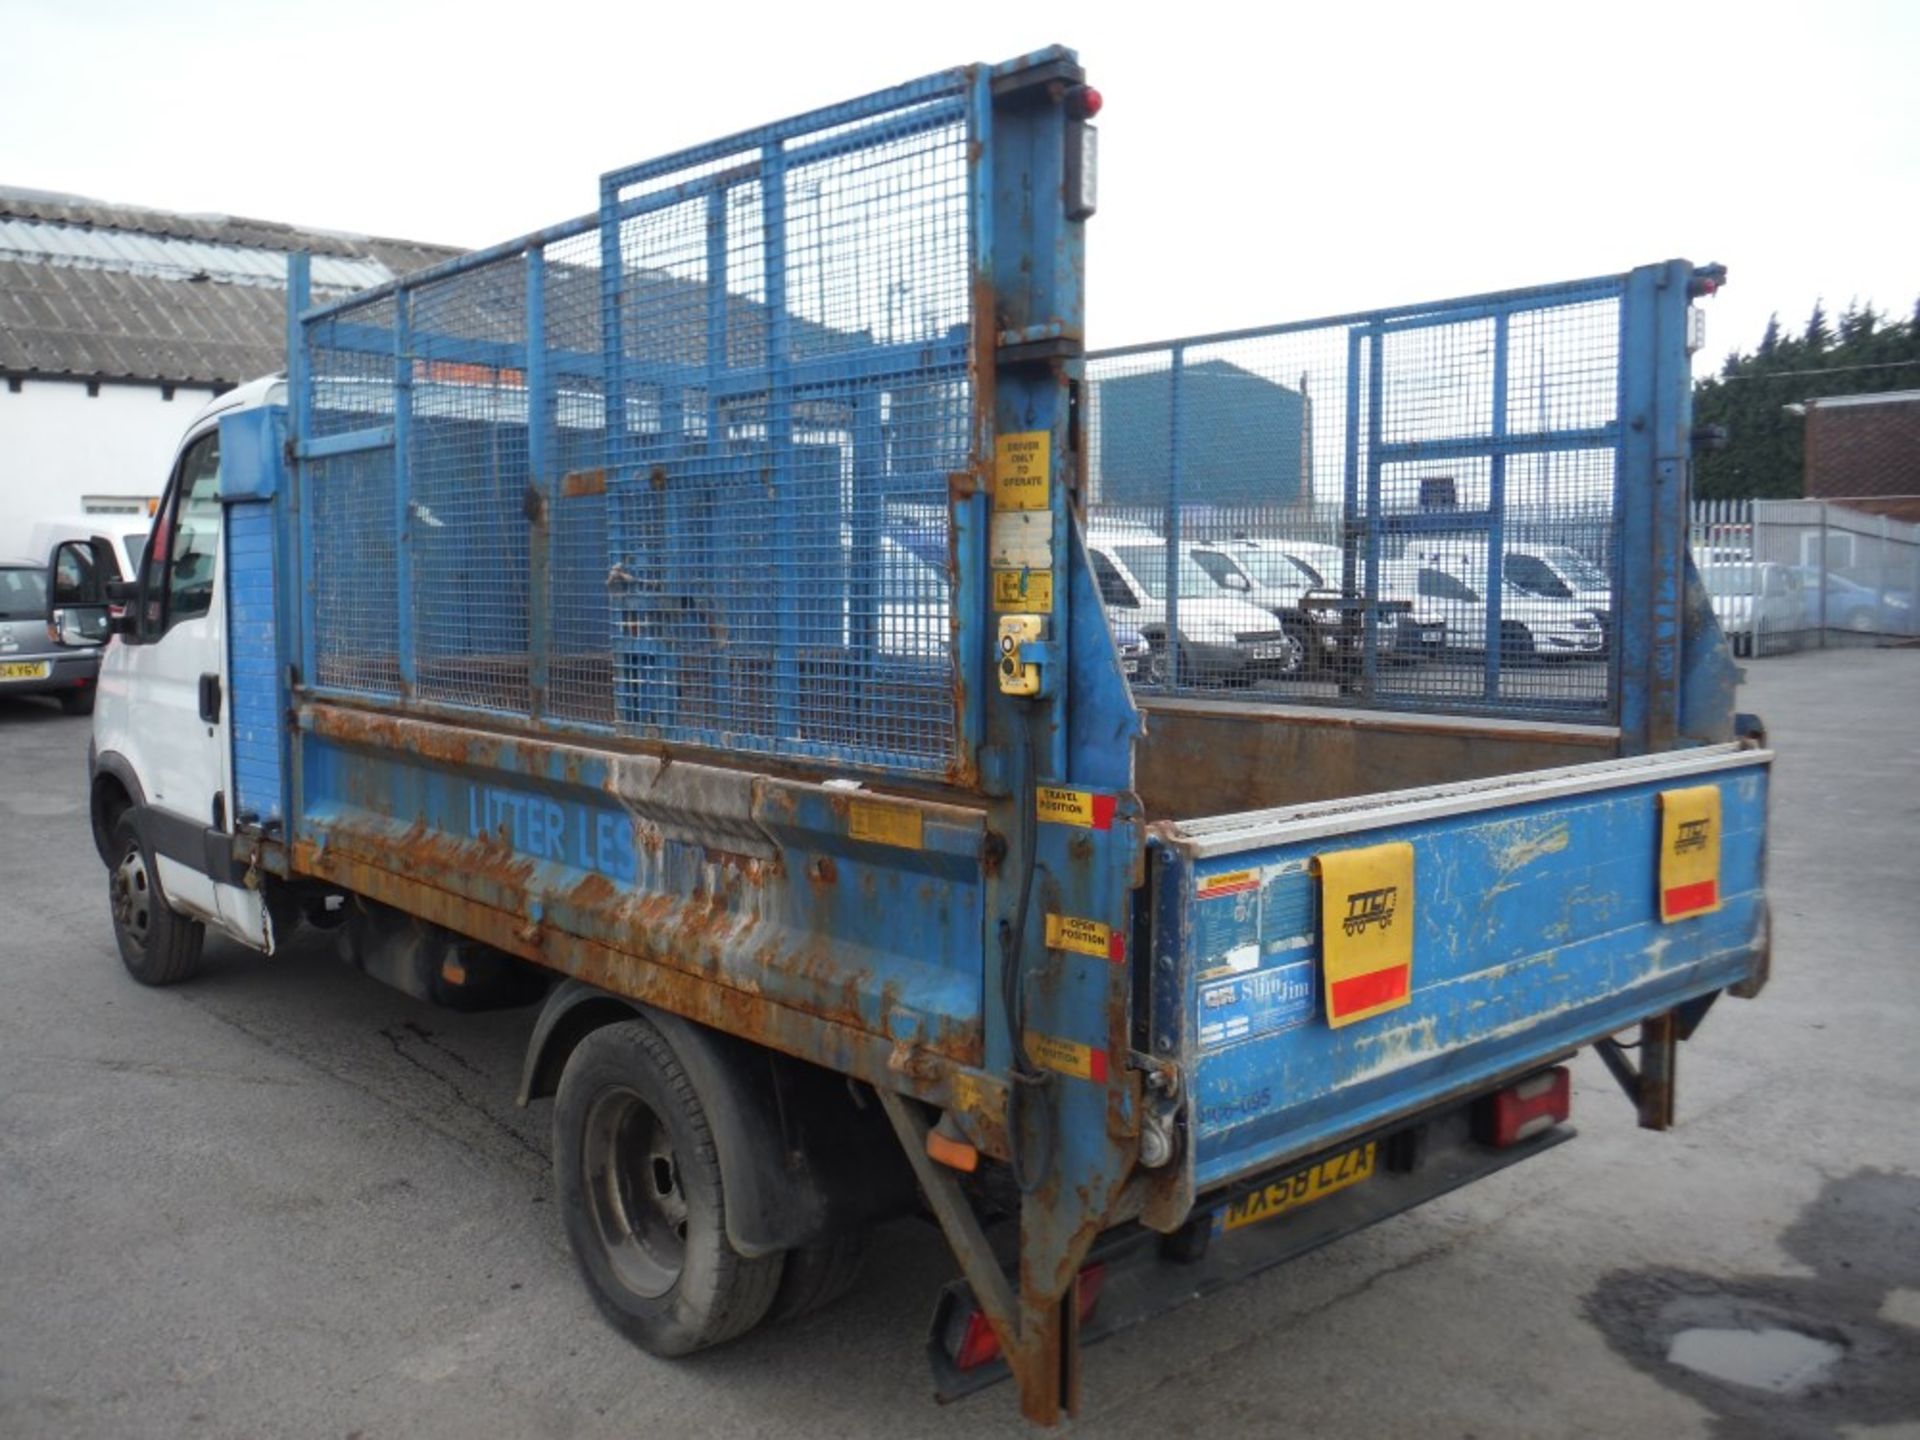 58 reg IVECO DAILY 50C15 CAGED TIPPER, 1ST REG 10/08, TEST 09/15, 117628M, V5 HERE, 1 OWNER FROM NEW - Image 3 of 5